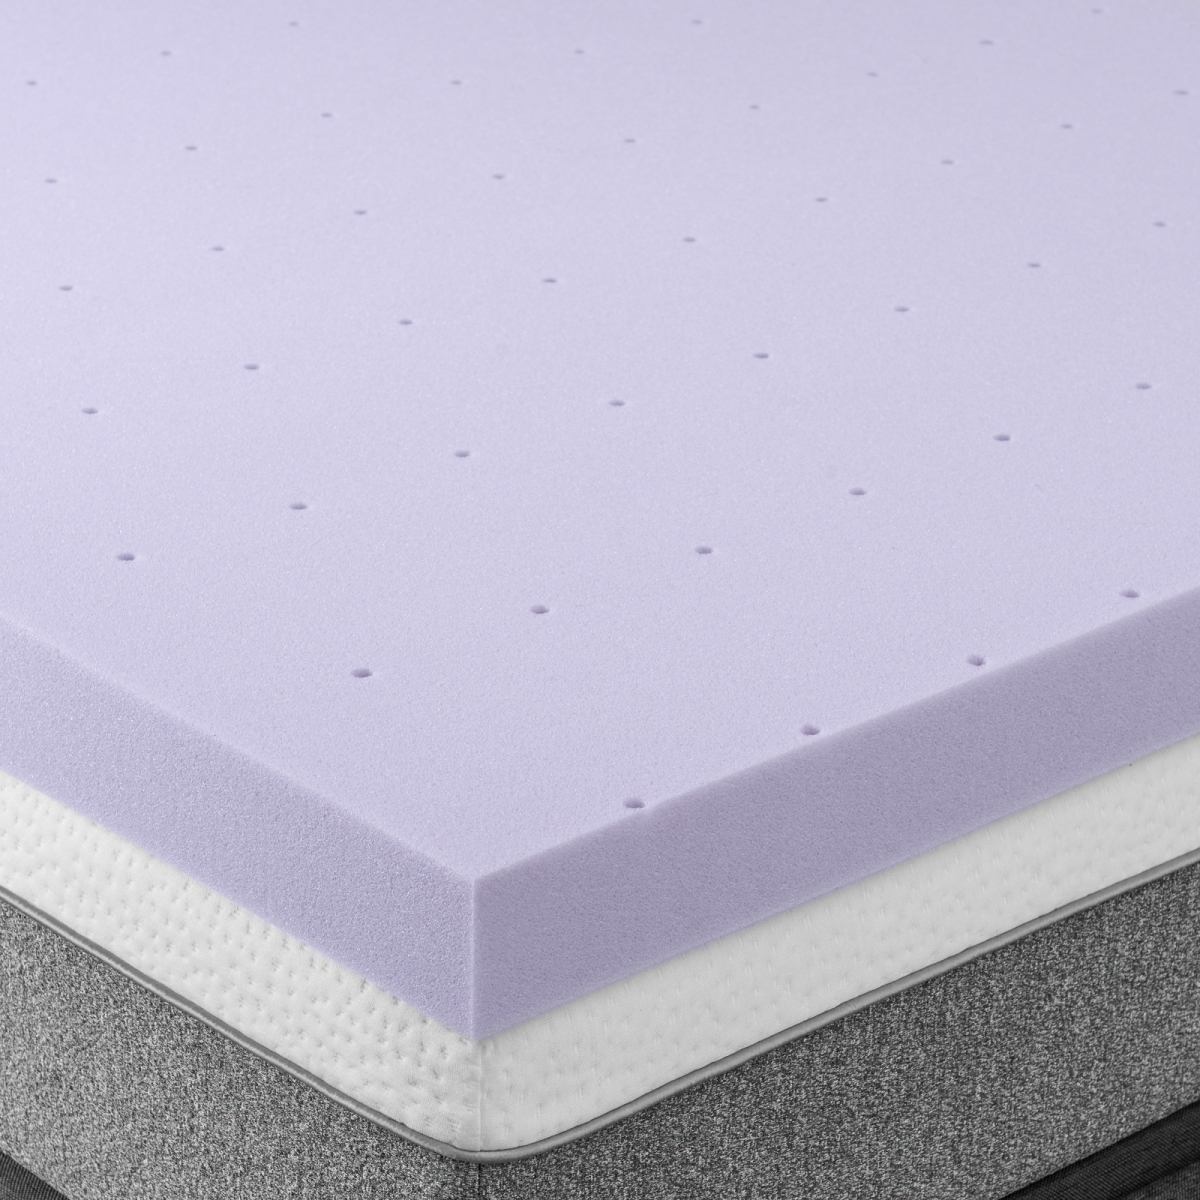 Panda Tq0051 3 In. Solace Sleep Lavender Infused & Ventilated Memory Foam Slab Mattress Topper, Queen